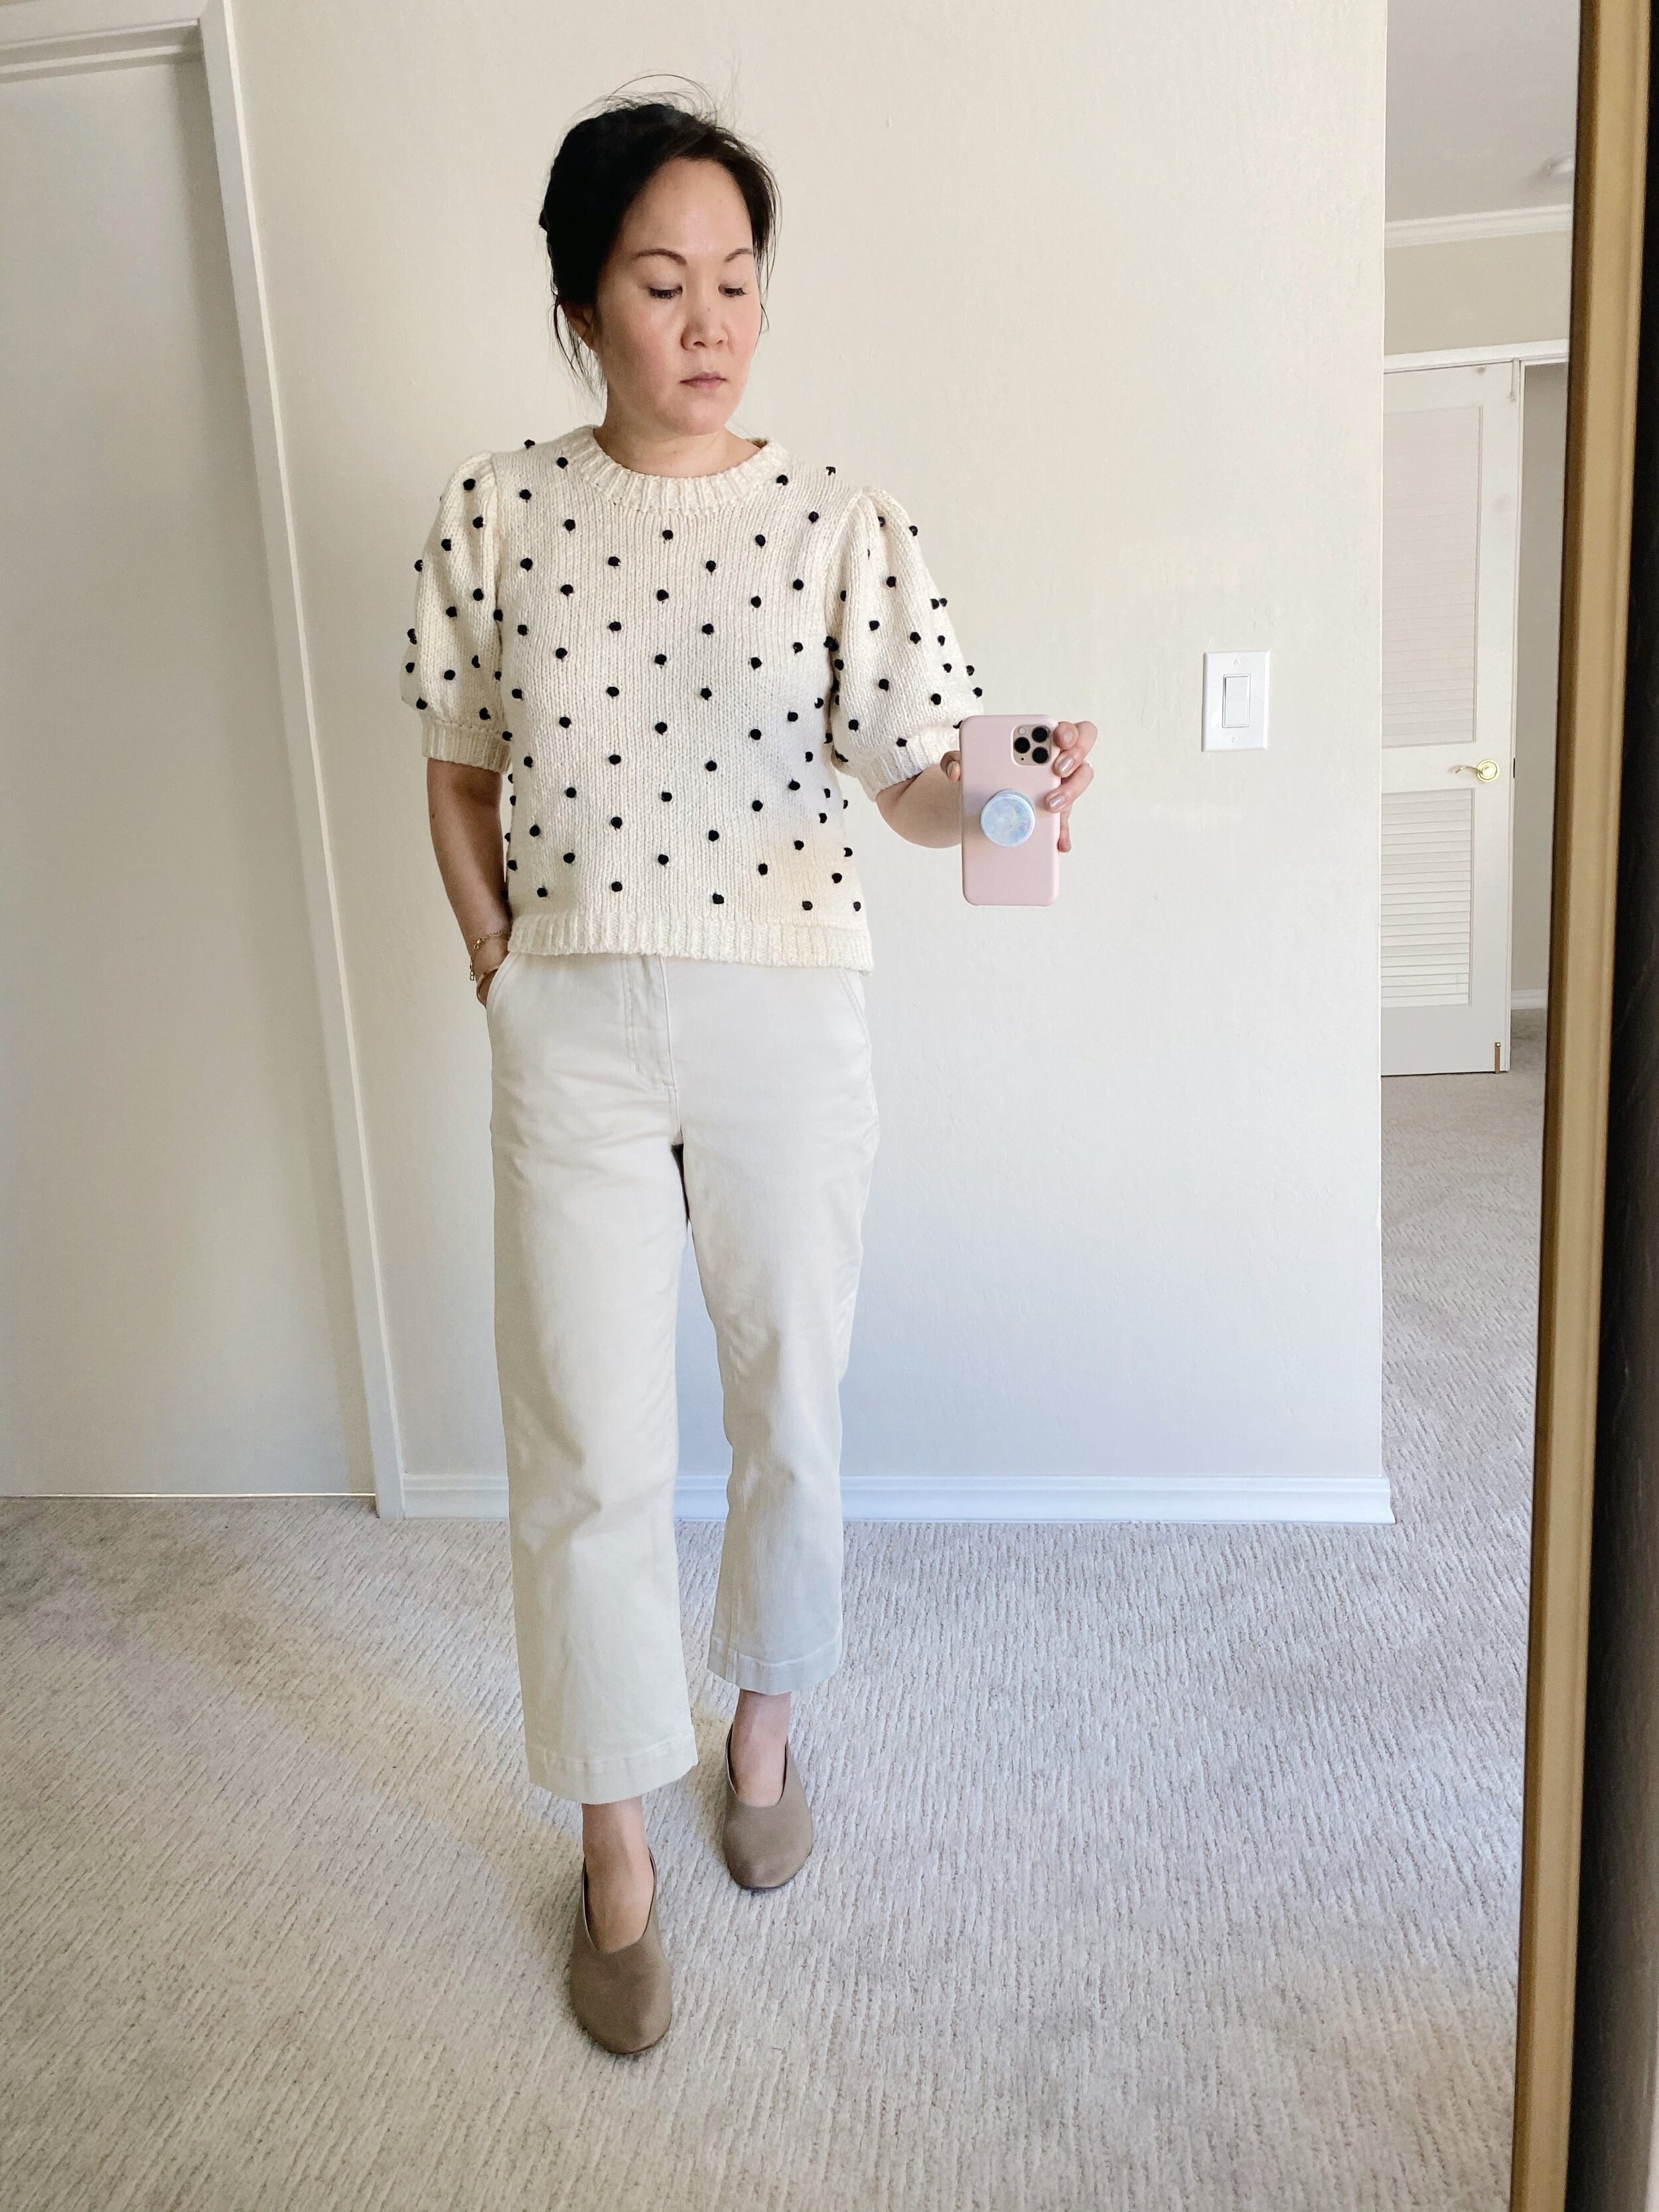 Everlane Review: The Straight Leg Crop + Giveaway {Closed